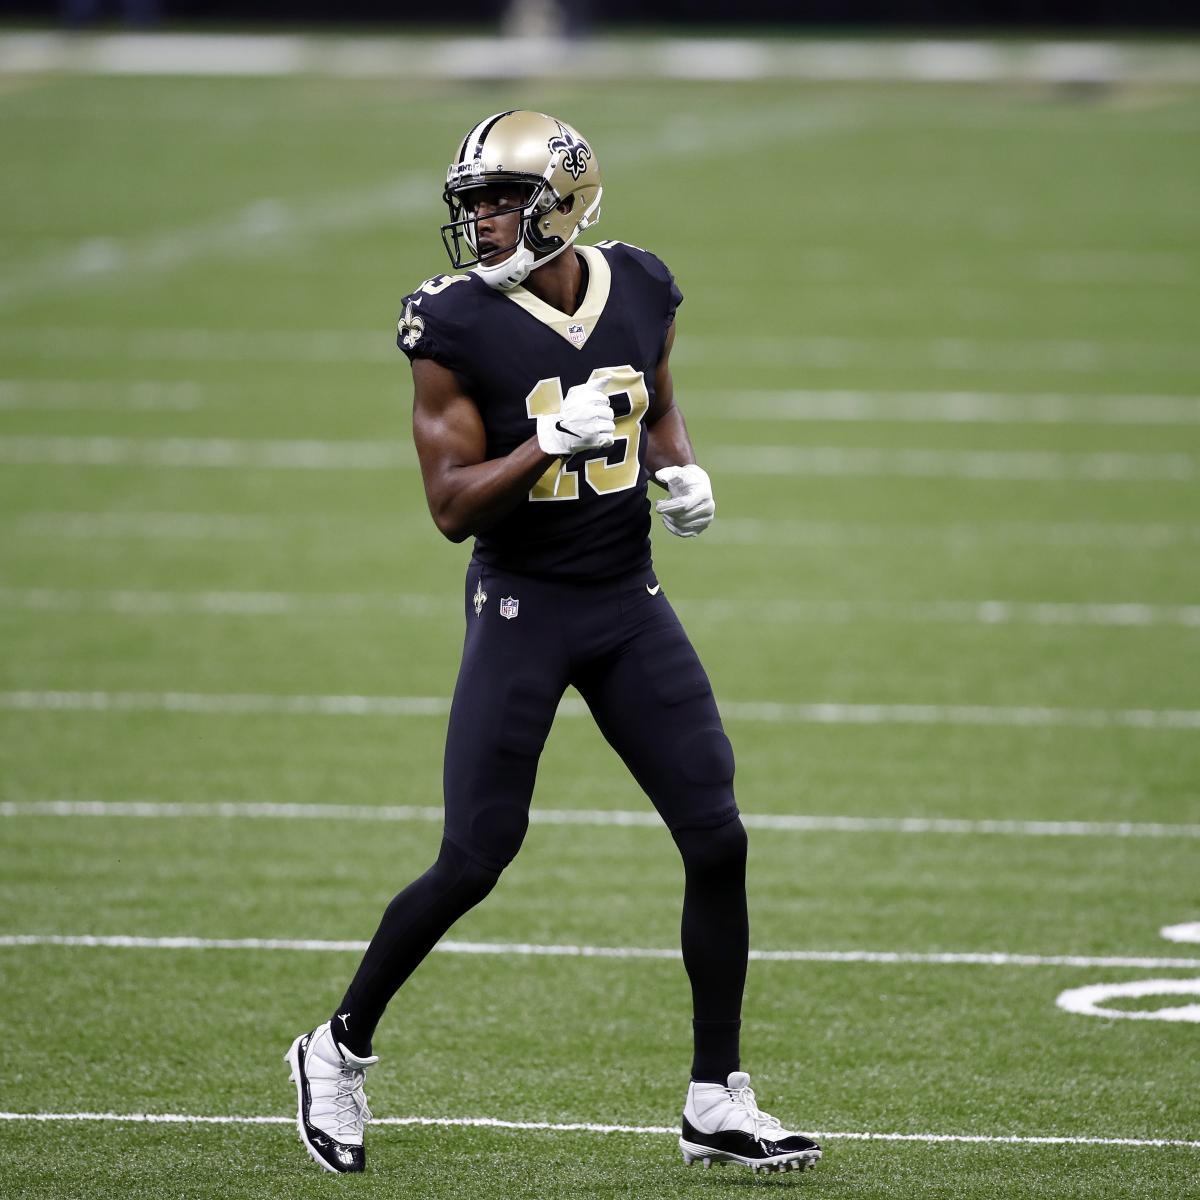 Memoir Alert: Saints’ Michael Thomas Upgraded to Questionable with Ankle Damage